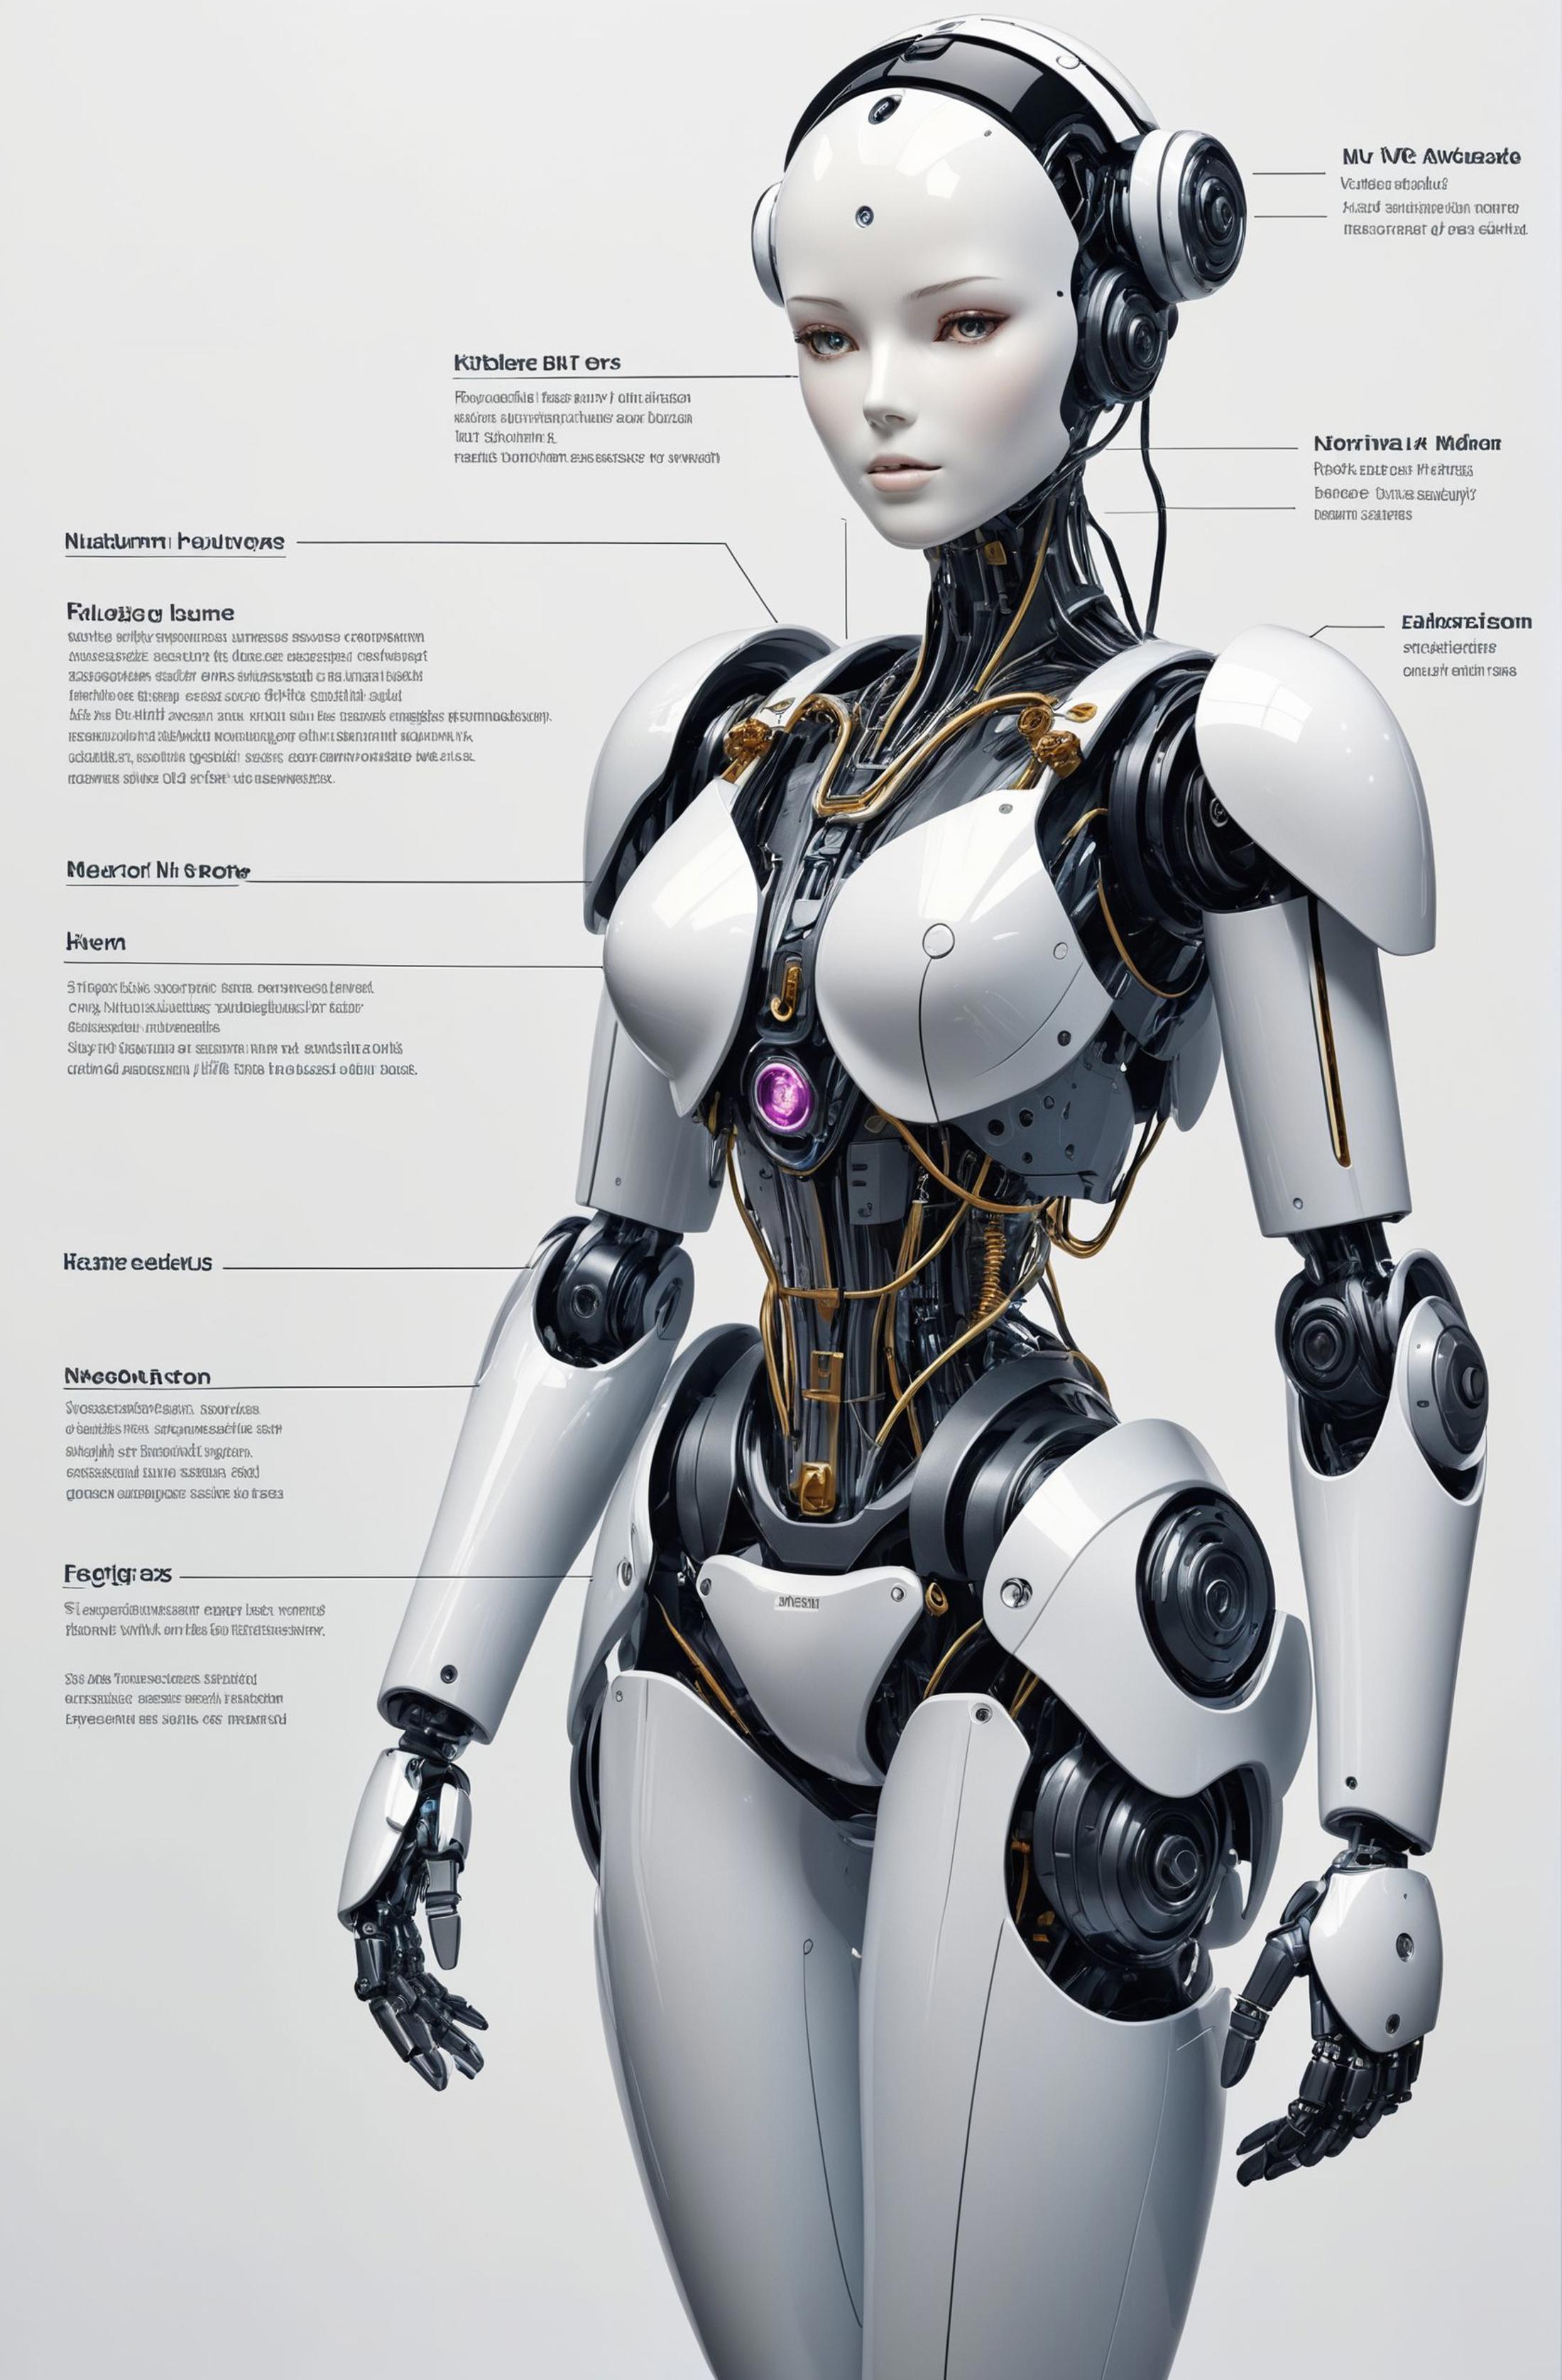 A Robot Woman with Diagrams of Her Body Parts